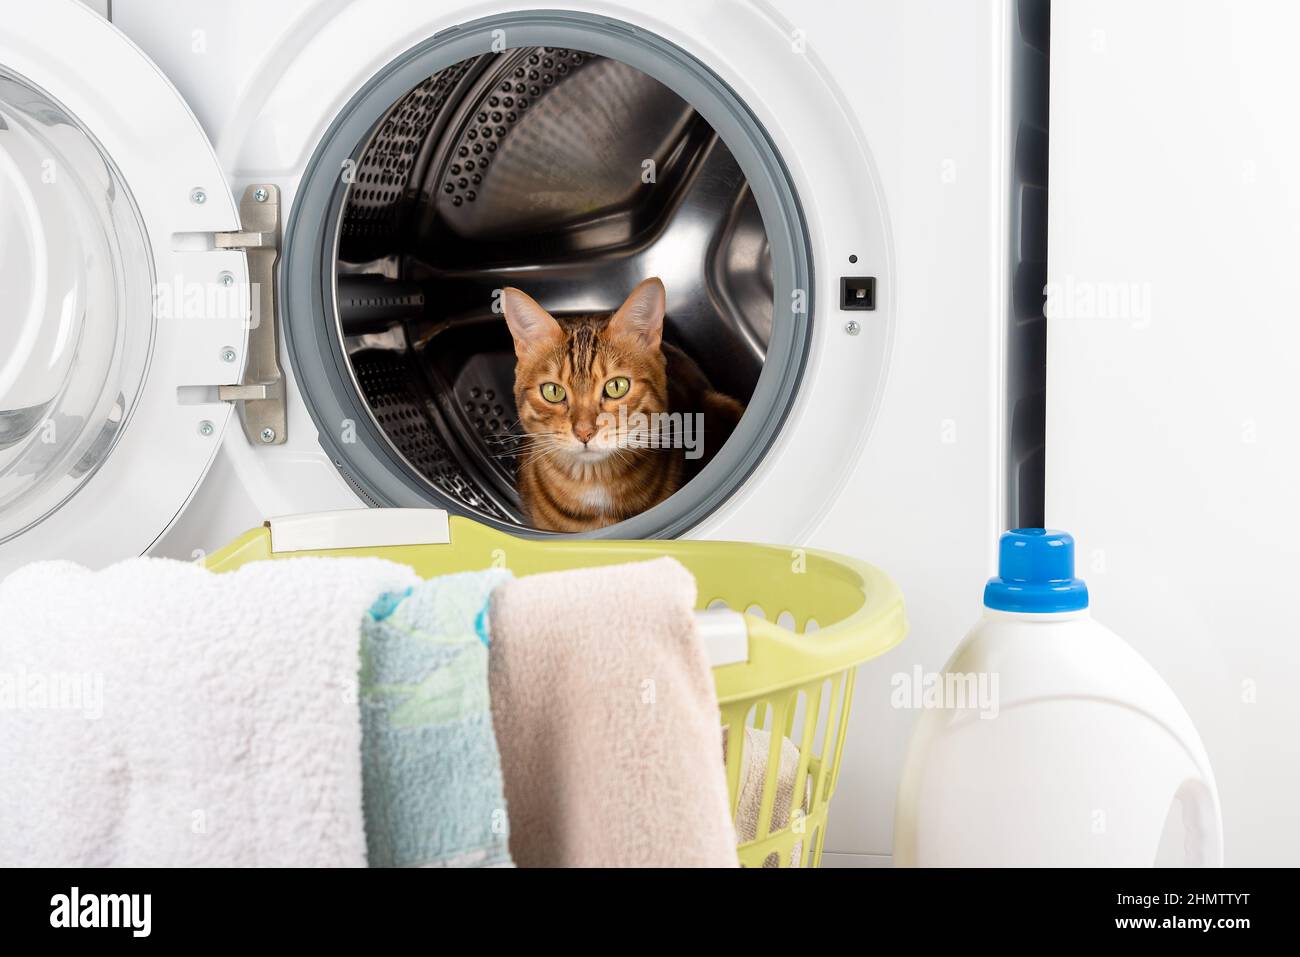 A cute Bengal cat sits in an empty washing machine. Laundry basket nearby Stock Photo